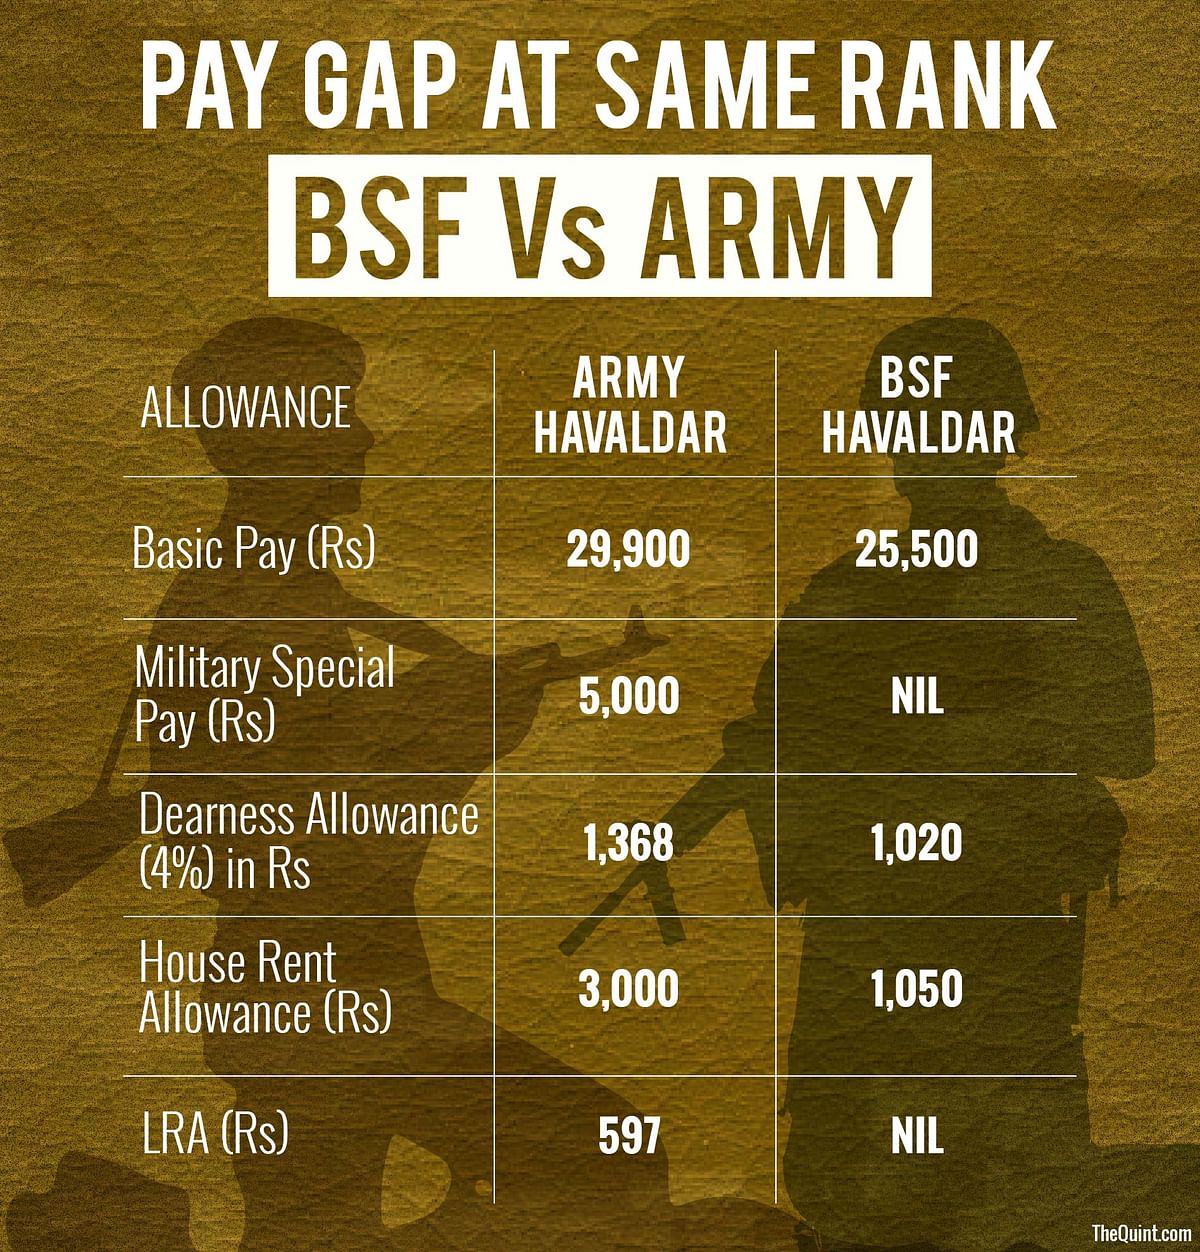 Why must BSF jawans be discriminated against on allowances when they do the same dangerous tasks as army soldiers?